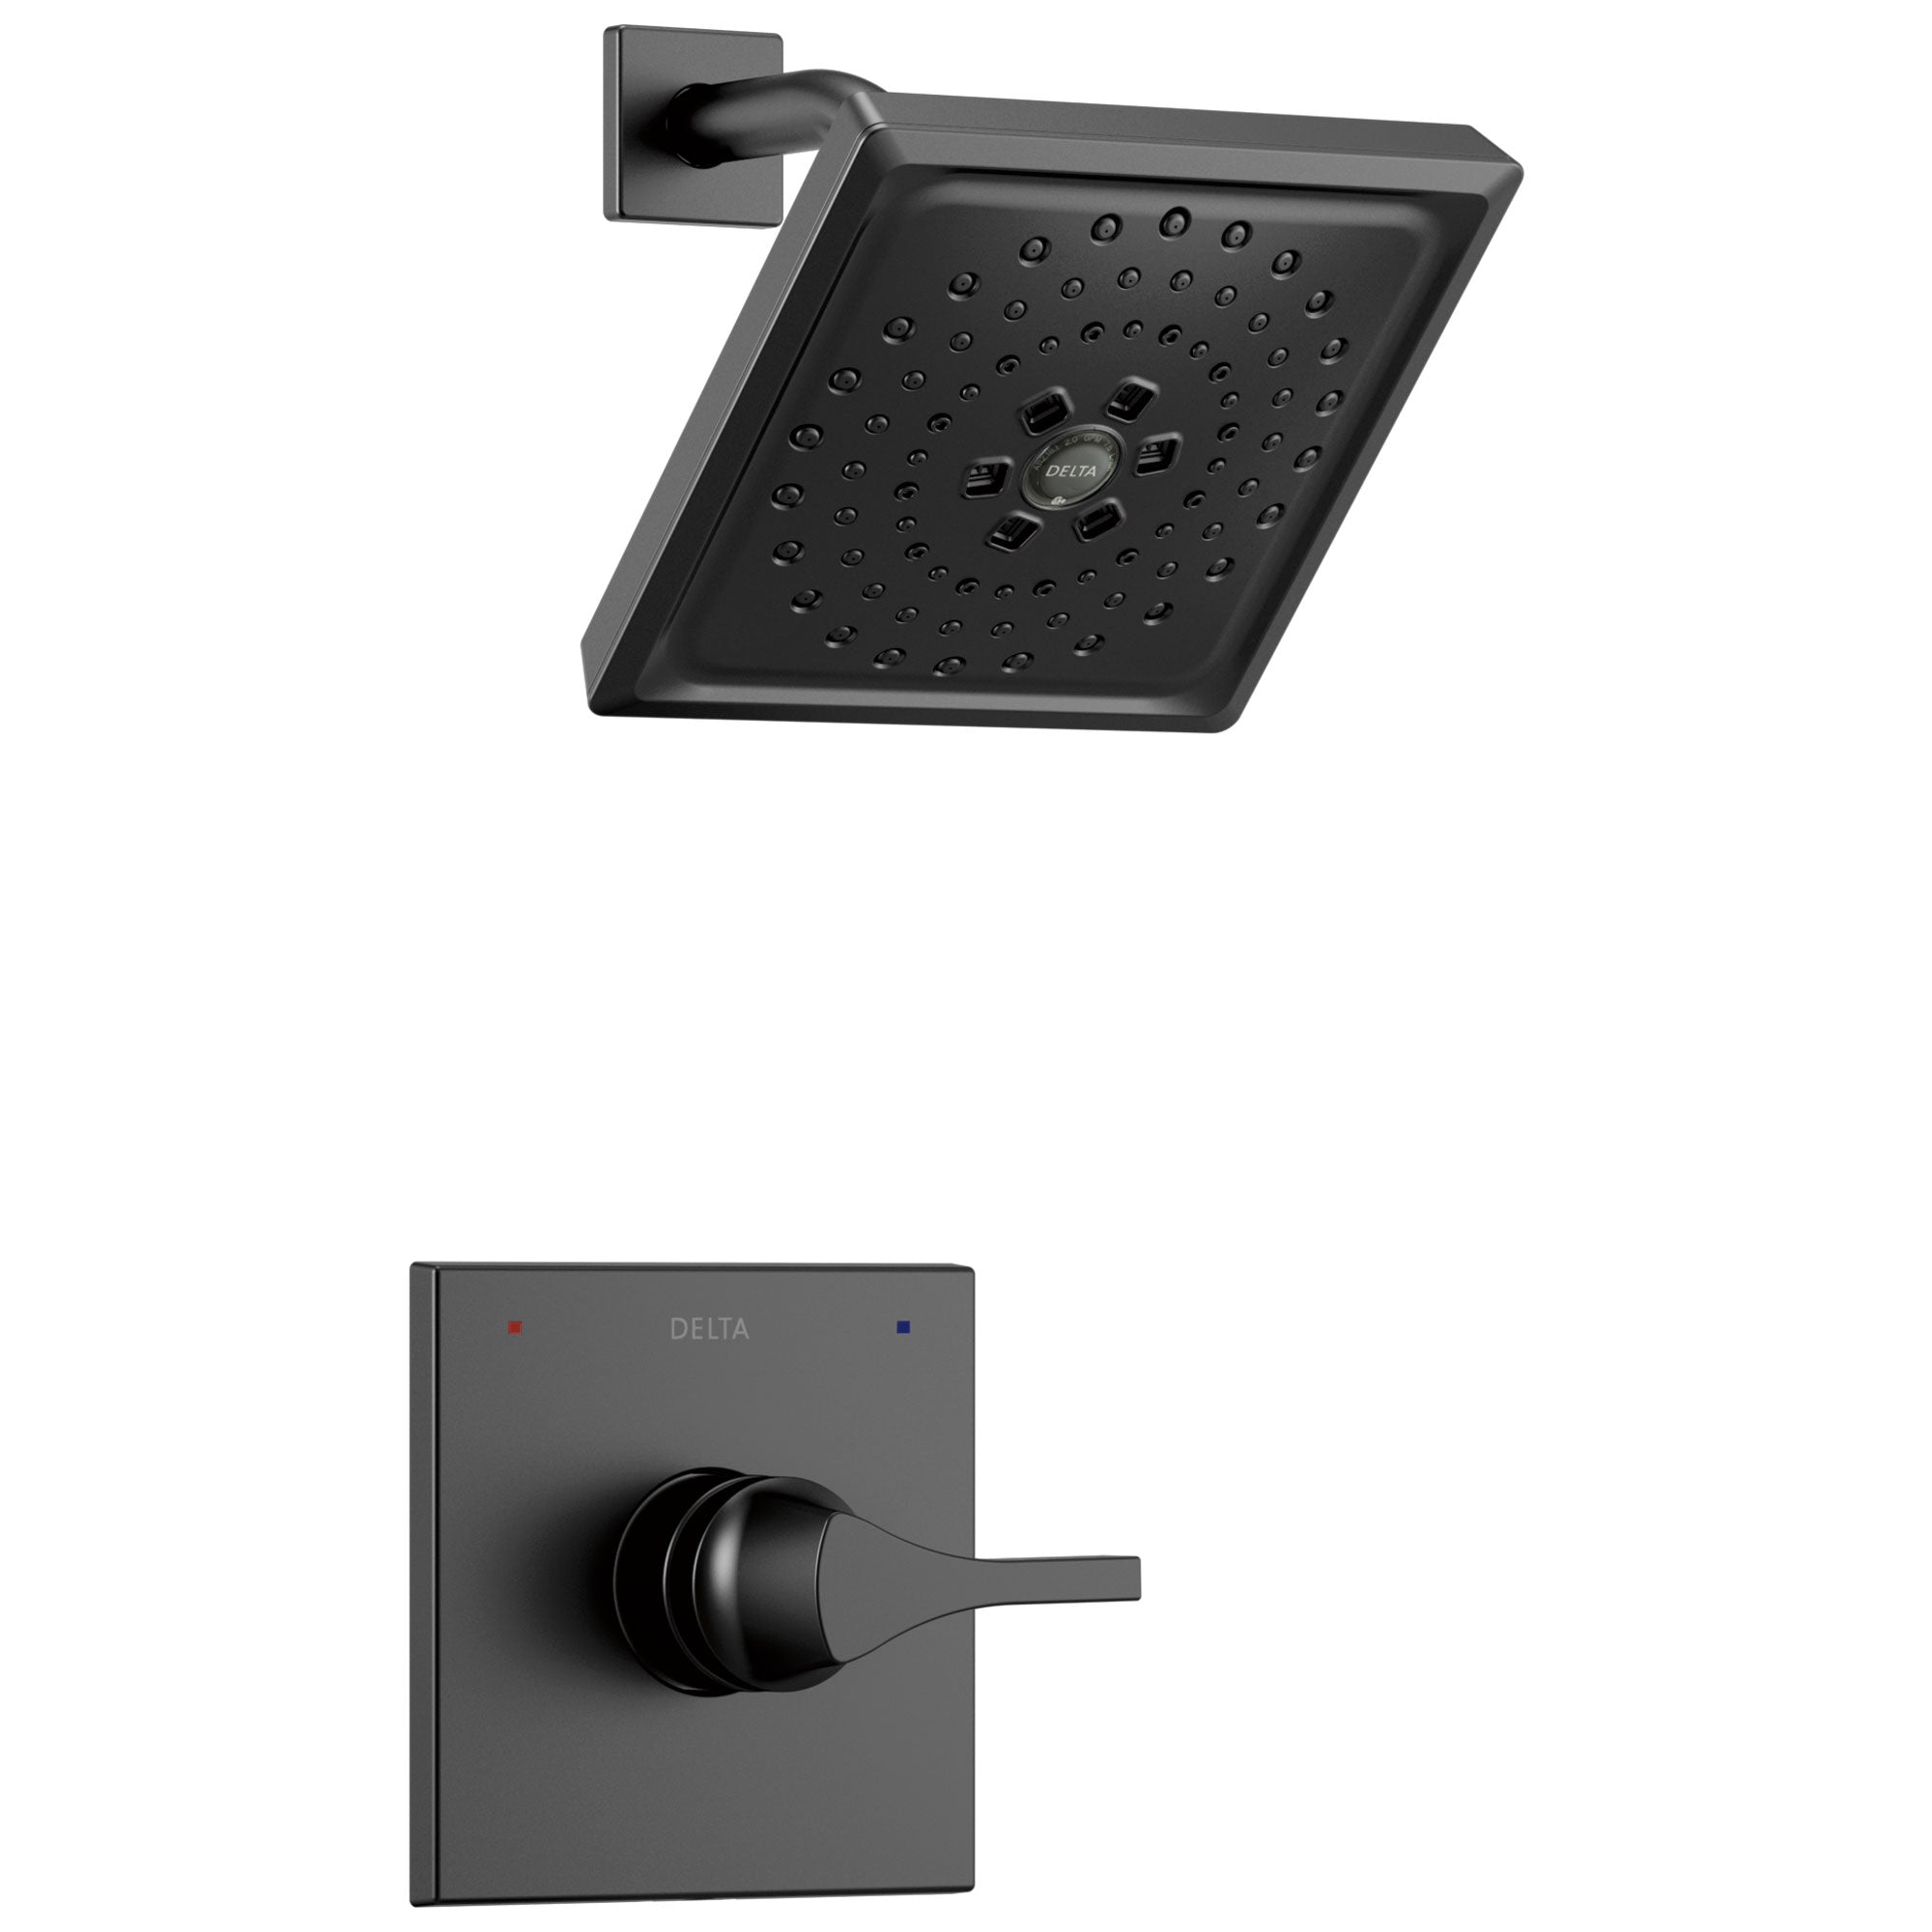 Delta Zura Matte Black Finish Monitor 14 Series H2Okinetic Shower only Faucet Includes Handle, Cartridge, and Valve with Stops D3641V